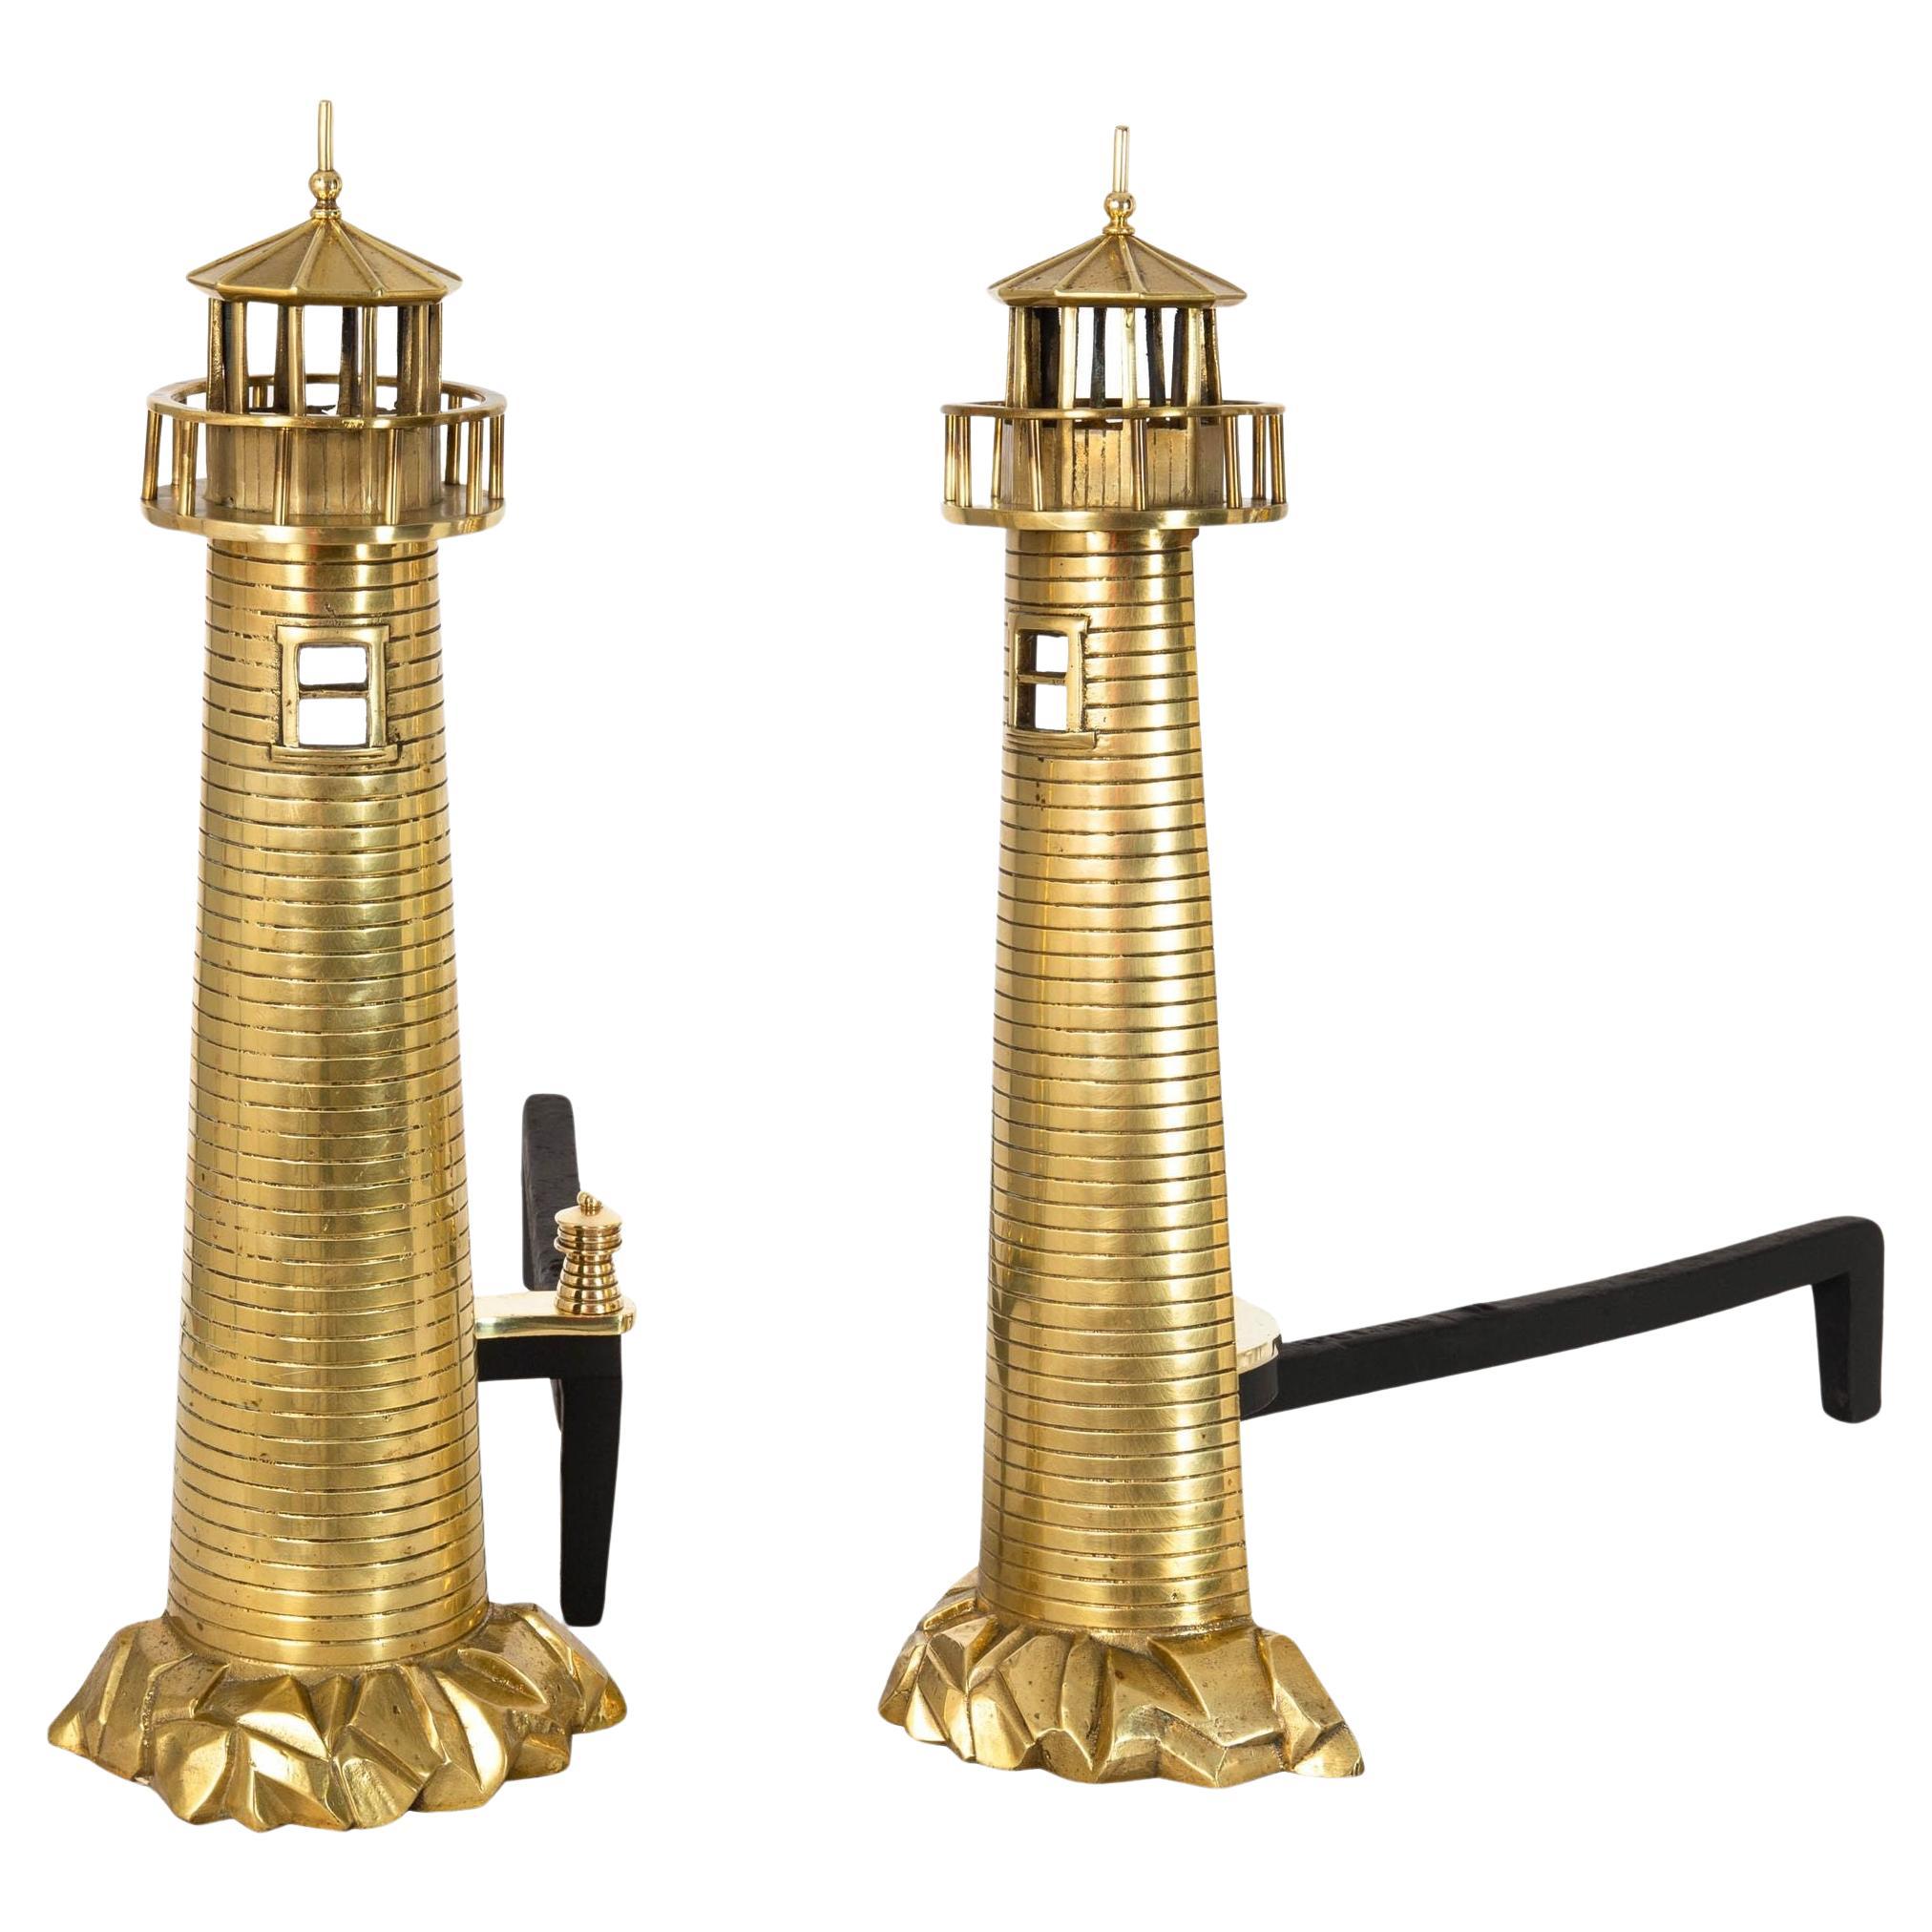 Pair of American Antique Lighthouse Brass Andirons by Rostand